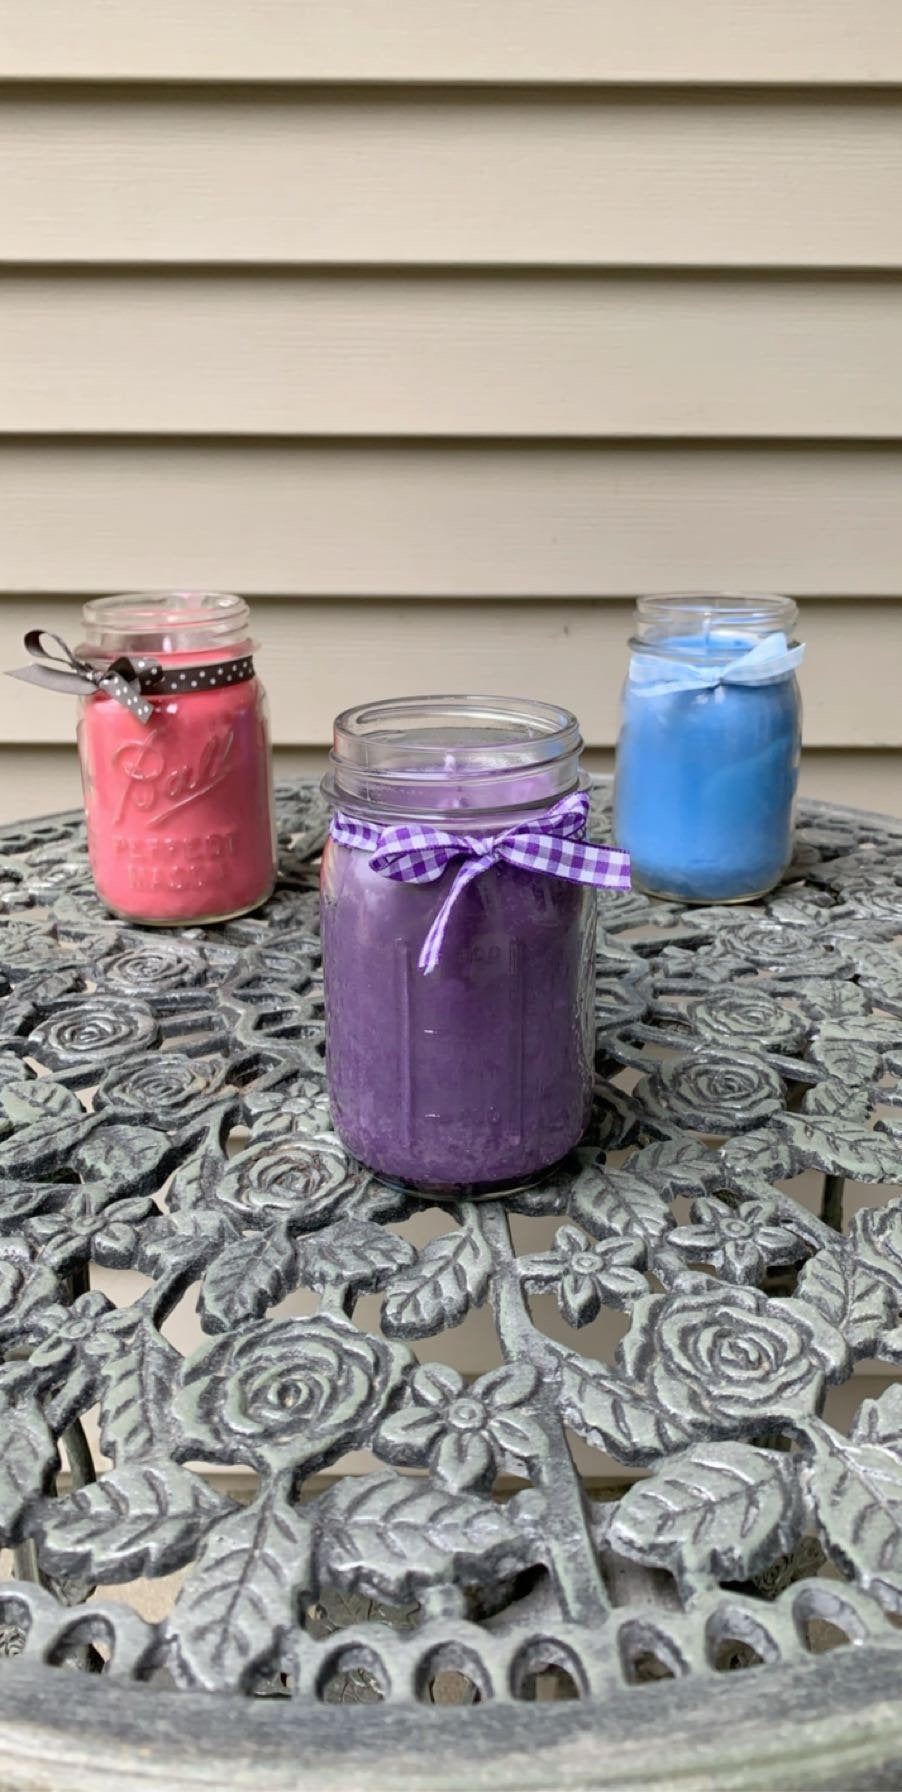 Set of 3 pint sized soy candles-candles with wicks-soy candles-scented candles-candle sets-rustic-favors-wedding-mason jar candles-spa scent